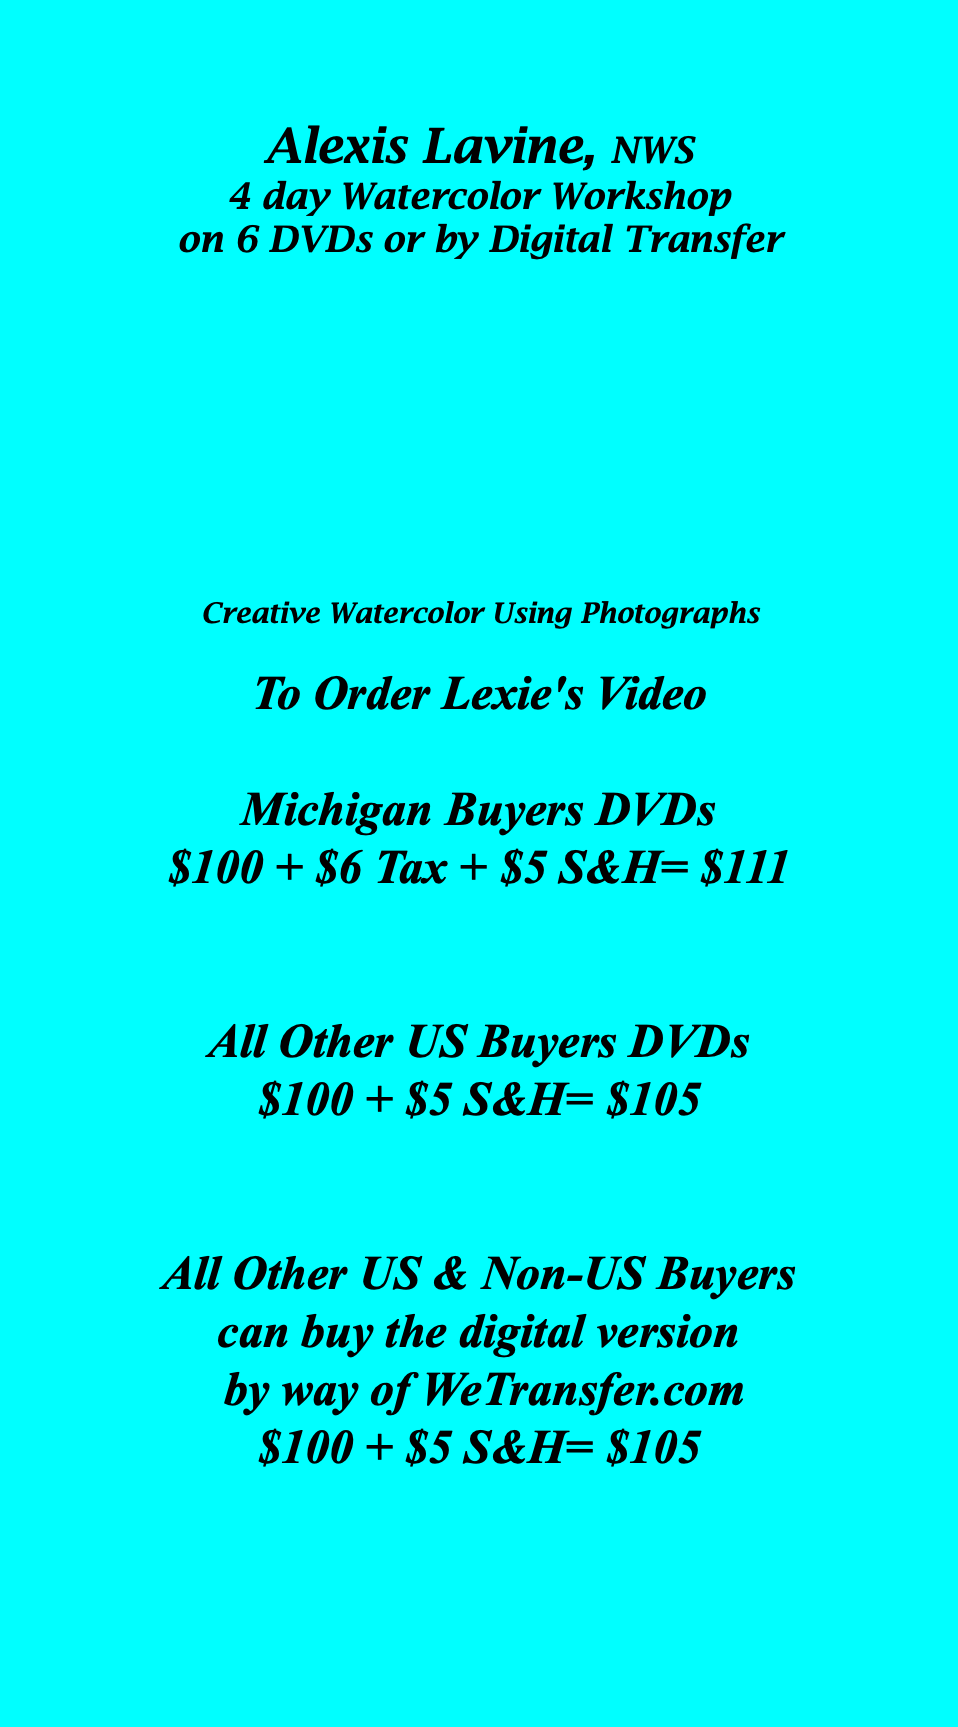  Alexis Lavine, NWS 4 day Watercolor Workshop on 6 DVDs or by Digital Transfer Creative Watercolor Using Photographs To Order Lexie's Video Michigan Buyers DVDs $100 + $6 Tax + $5 S&H= $111 All Other US Buyers DVDs $100 + $5 S&H= $105 All Other US & Non-US Buyers can buy the digital version by way of WeTransfer.com $100 + $5 S&H= $105 